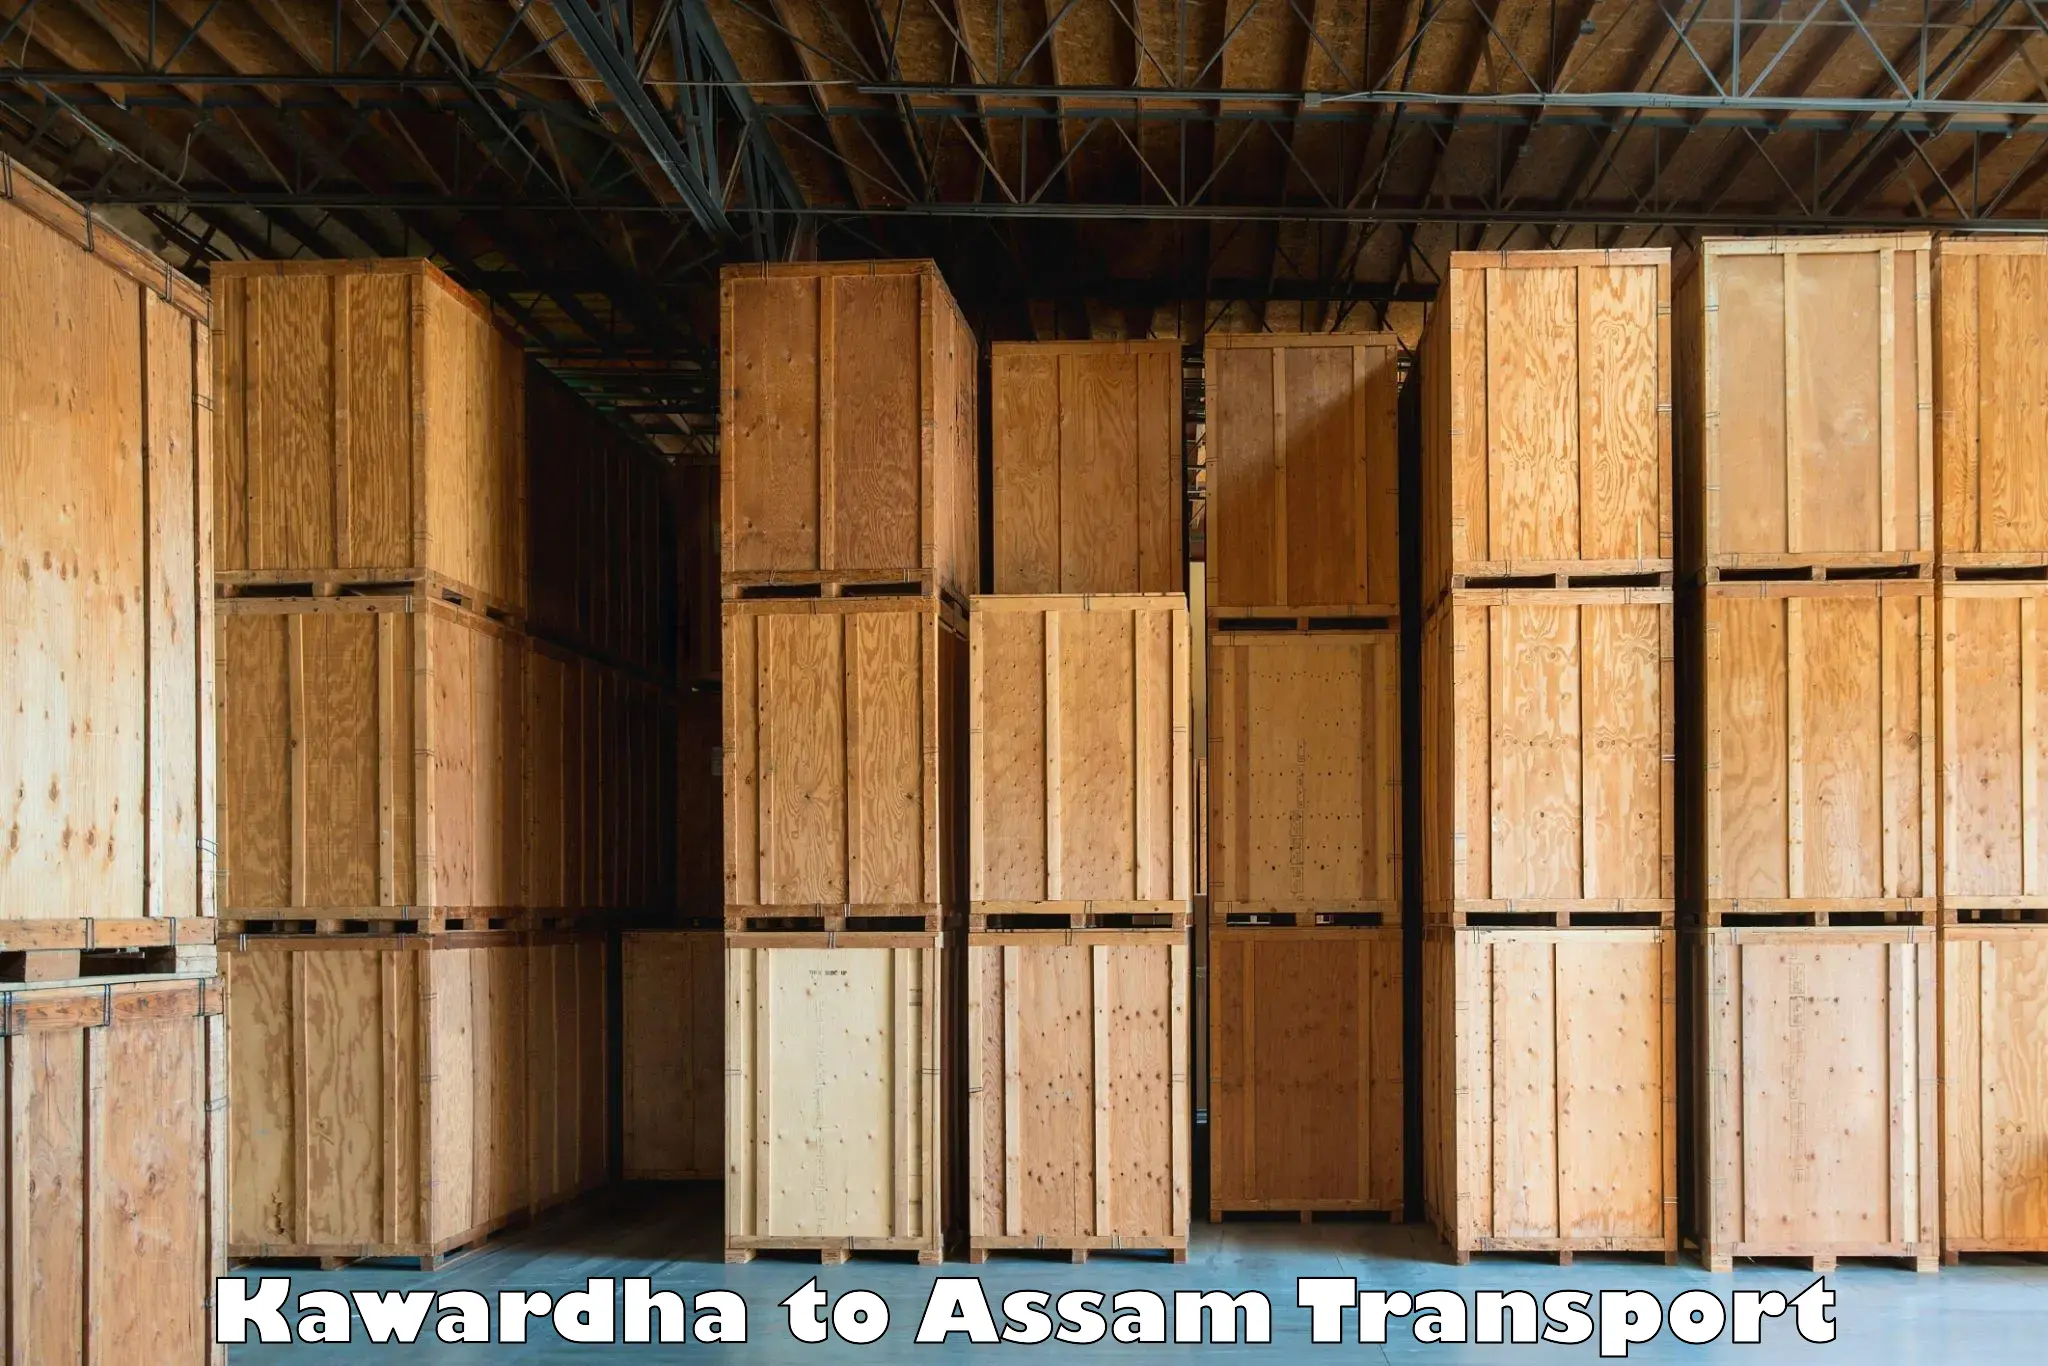 Transport bike from one state to another Kawardha to Assam